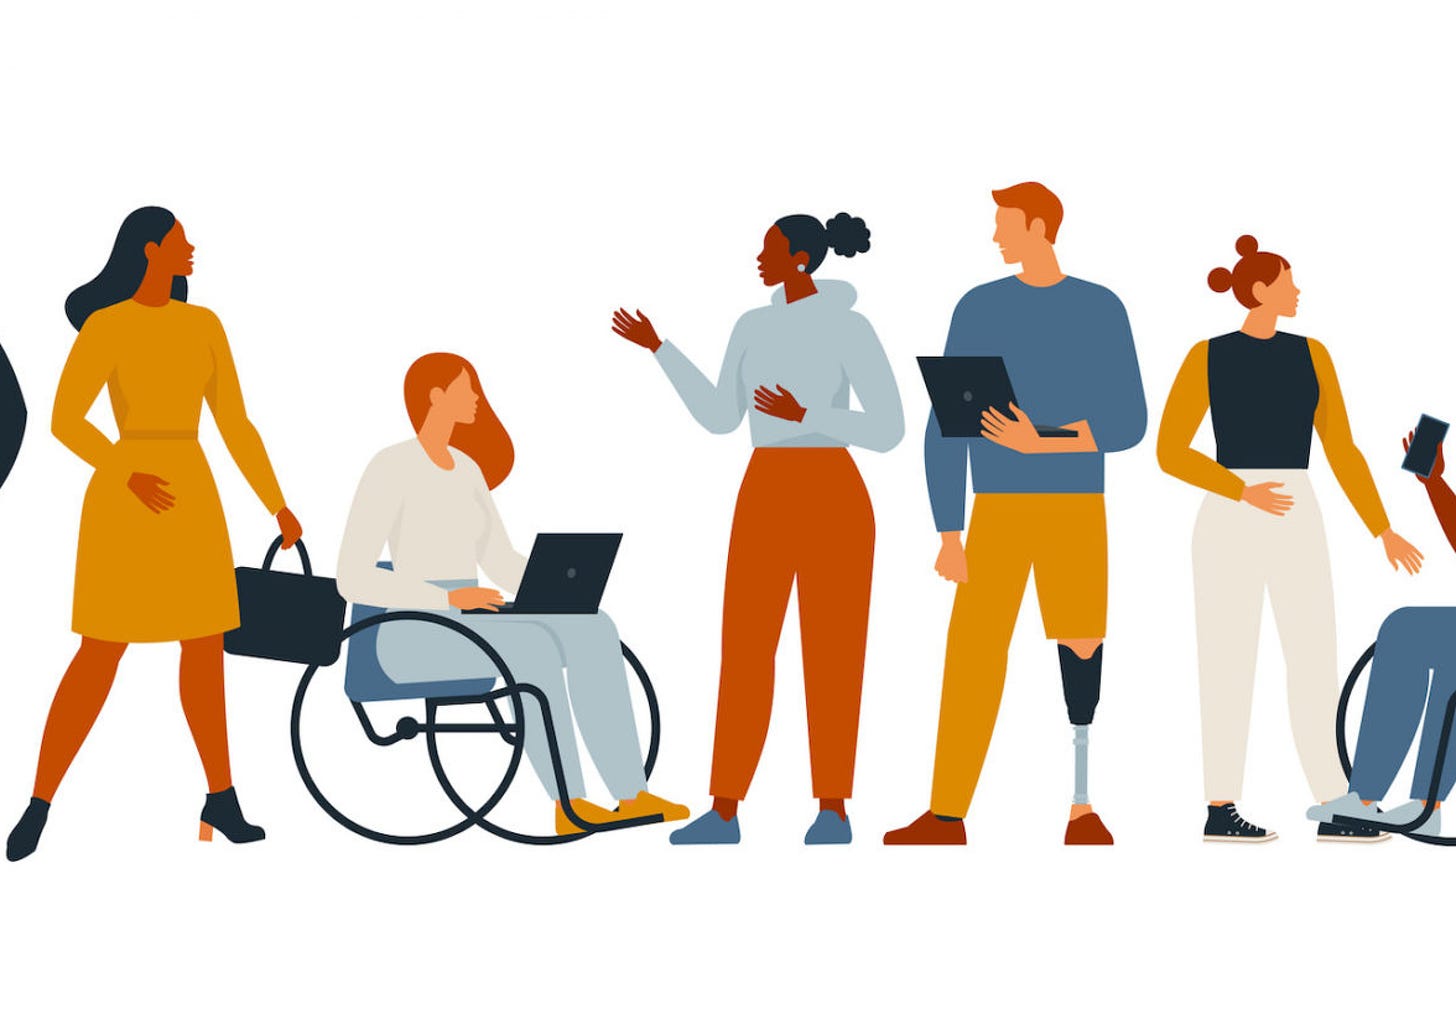 Illustration of diverse individuals with disabilities showcasing inclusion and empowerment